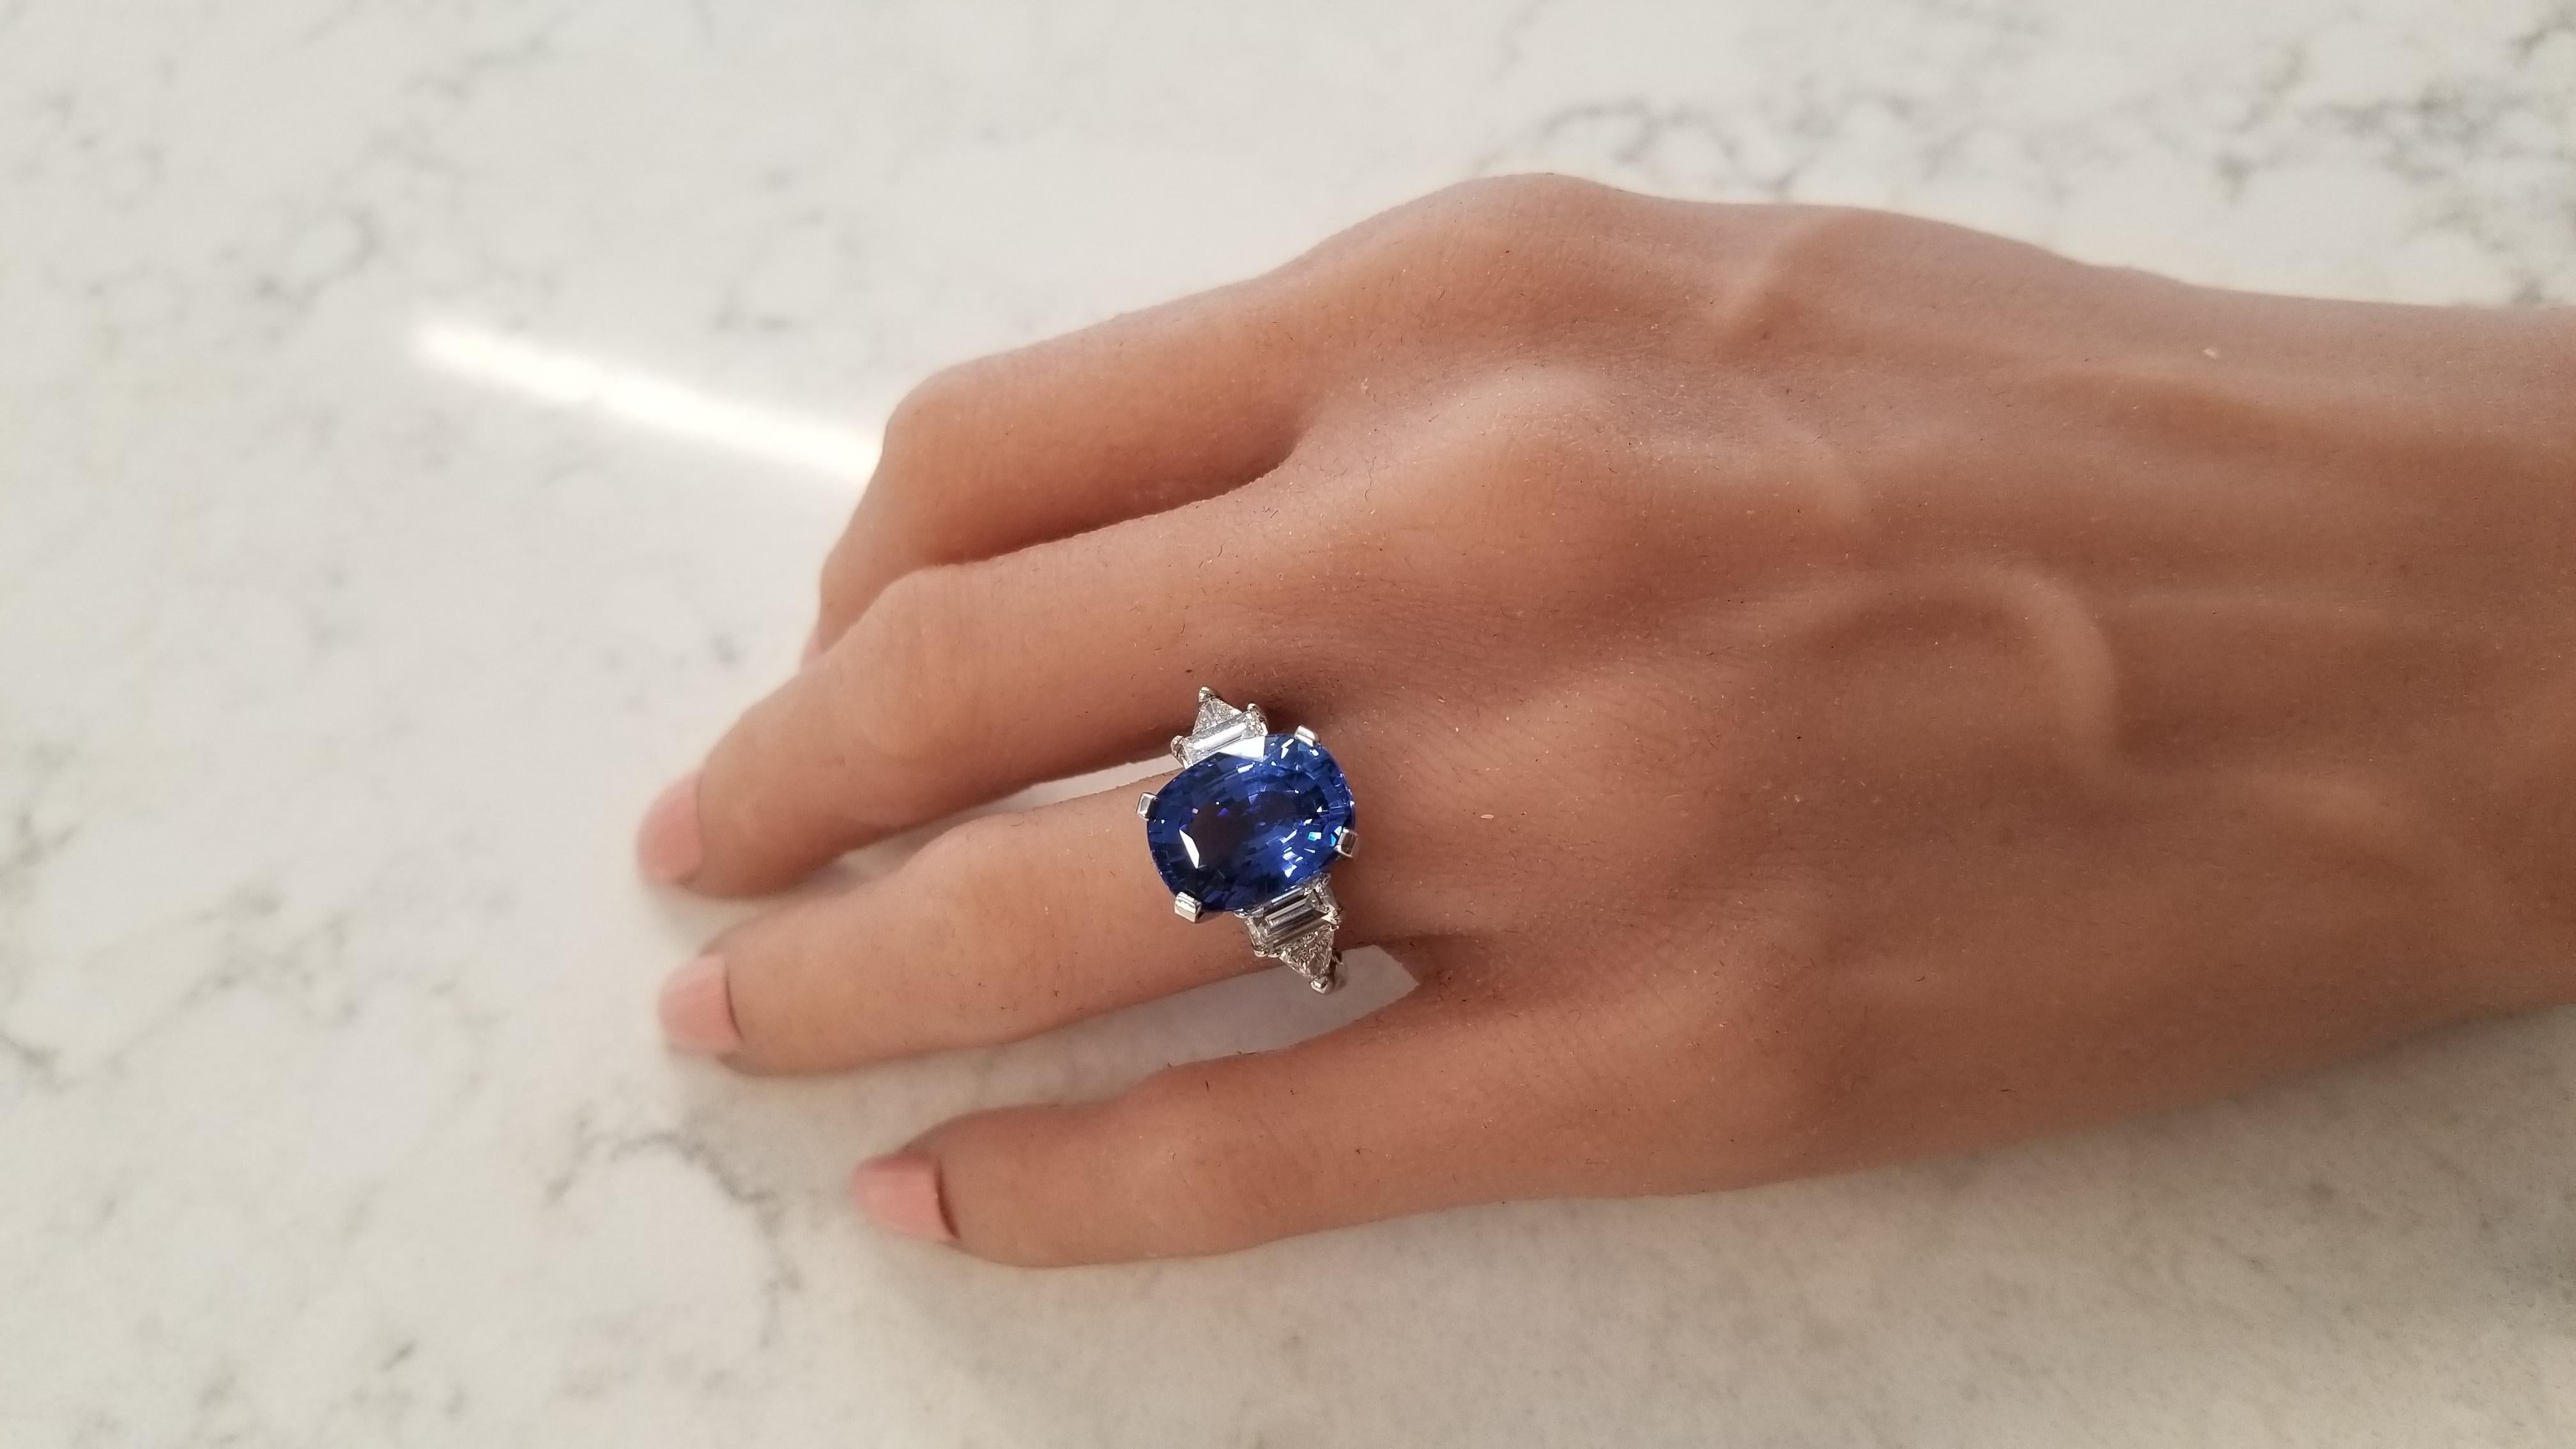 GIA Certified 10.12 Carat Cushion Blue Sapphire & Diamond Cocktail Ring In Plat 1